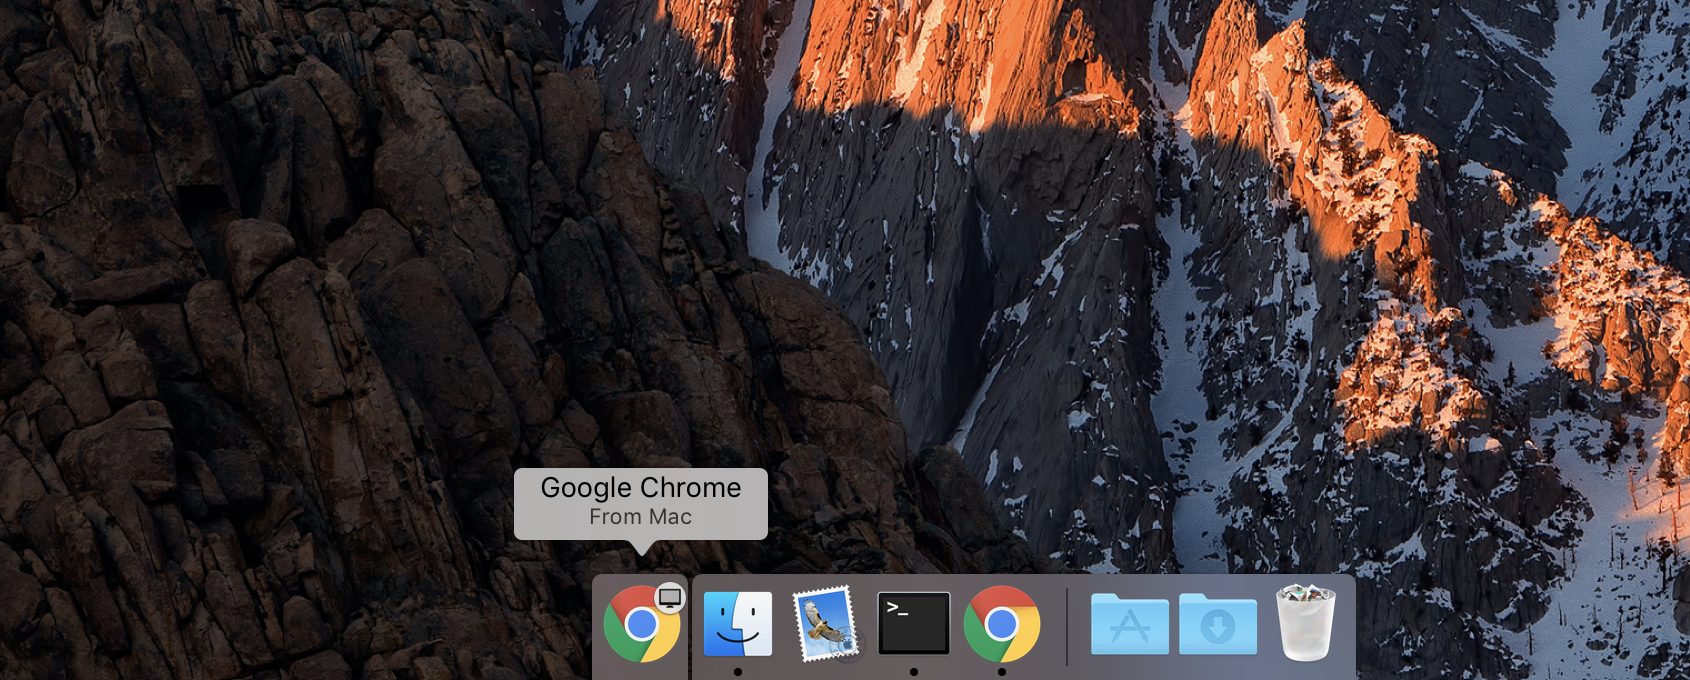 always on top for google chrome in mac os x